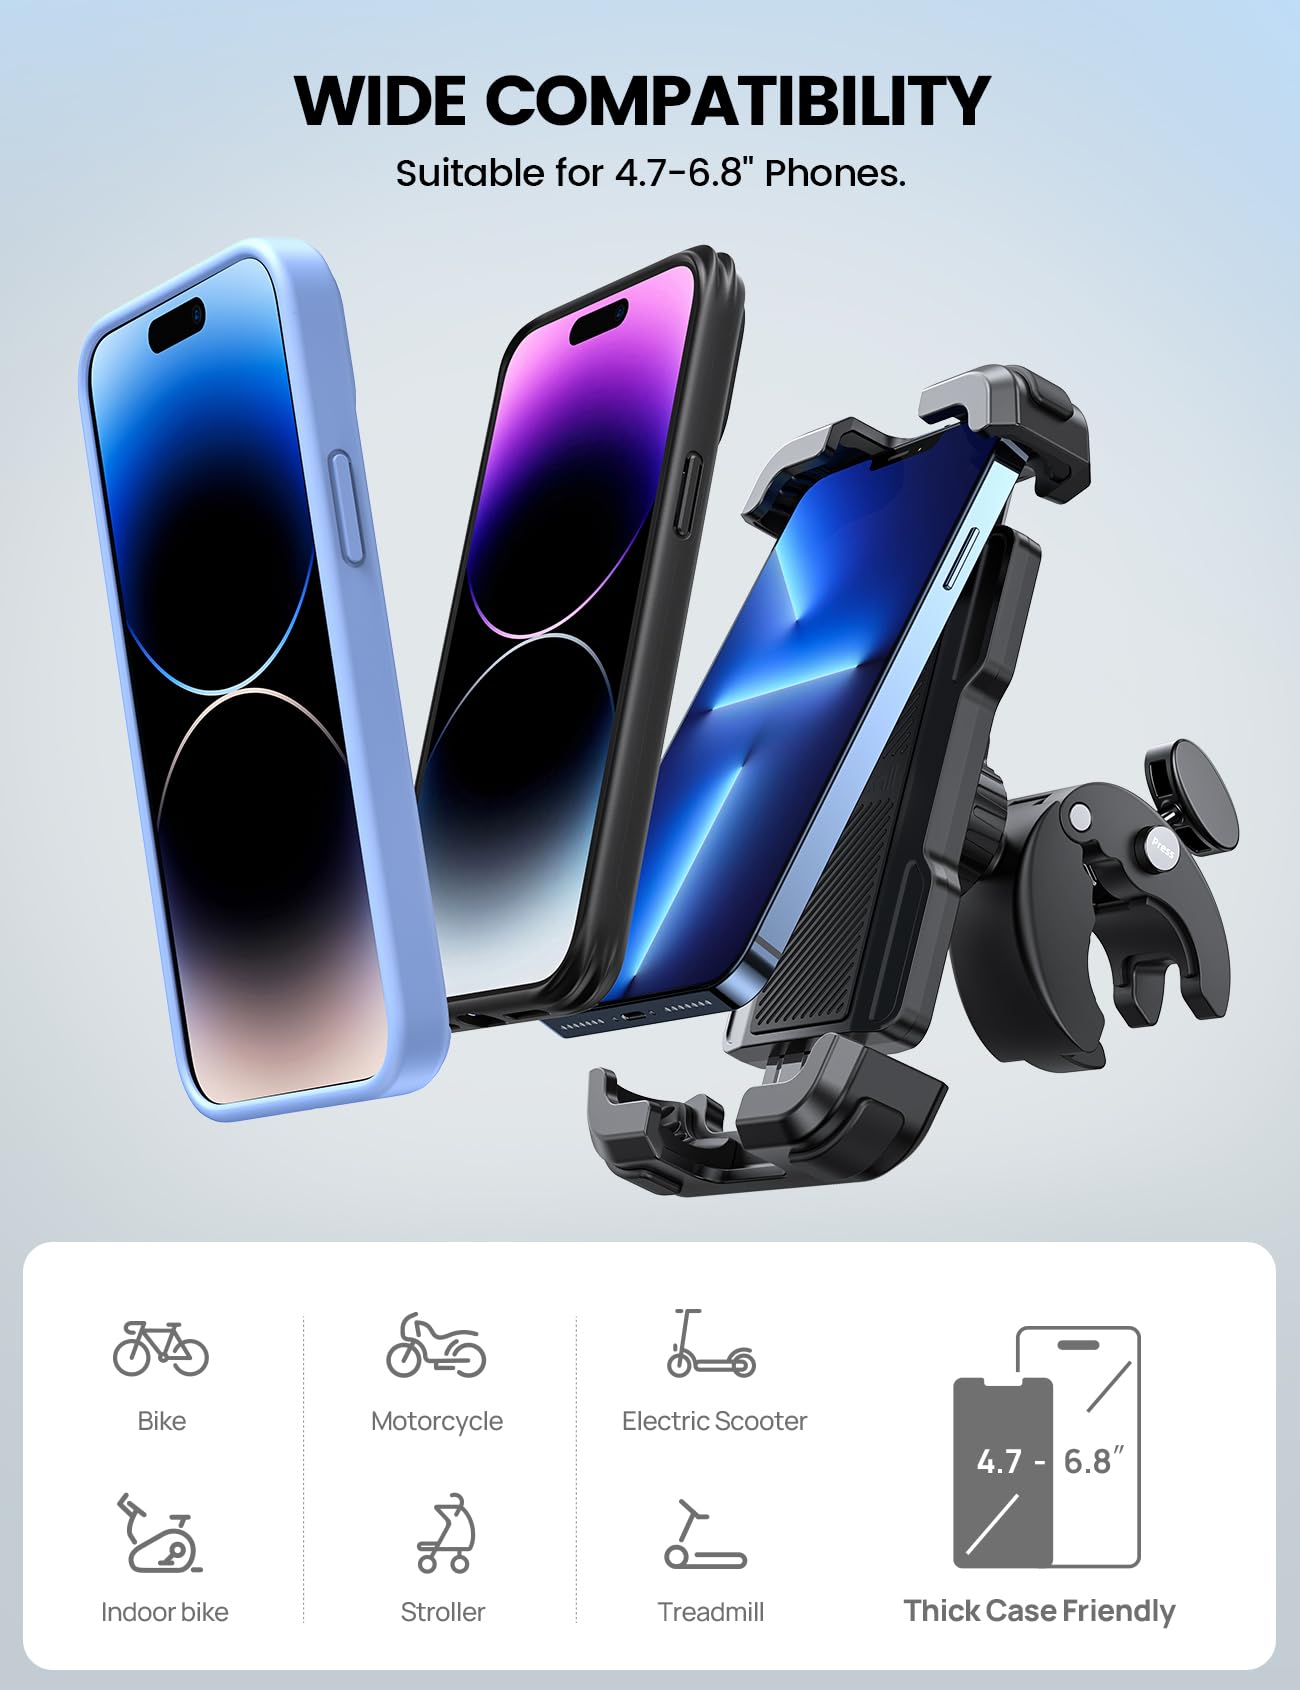 Lamicall Motorcycle Phone Mount, Bike Phone Holder - Upgrade Quick Install Handlebar Clip for Bicycle Scooter, Cell Phone Clamp for iPhone 14 Pro Max / 13/12, Galaxy S10 and More 4.7-6.8